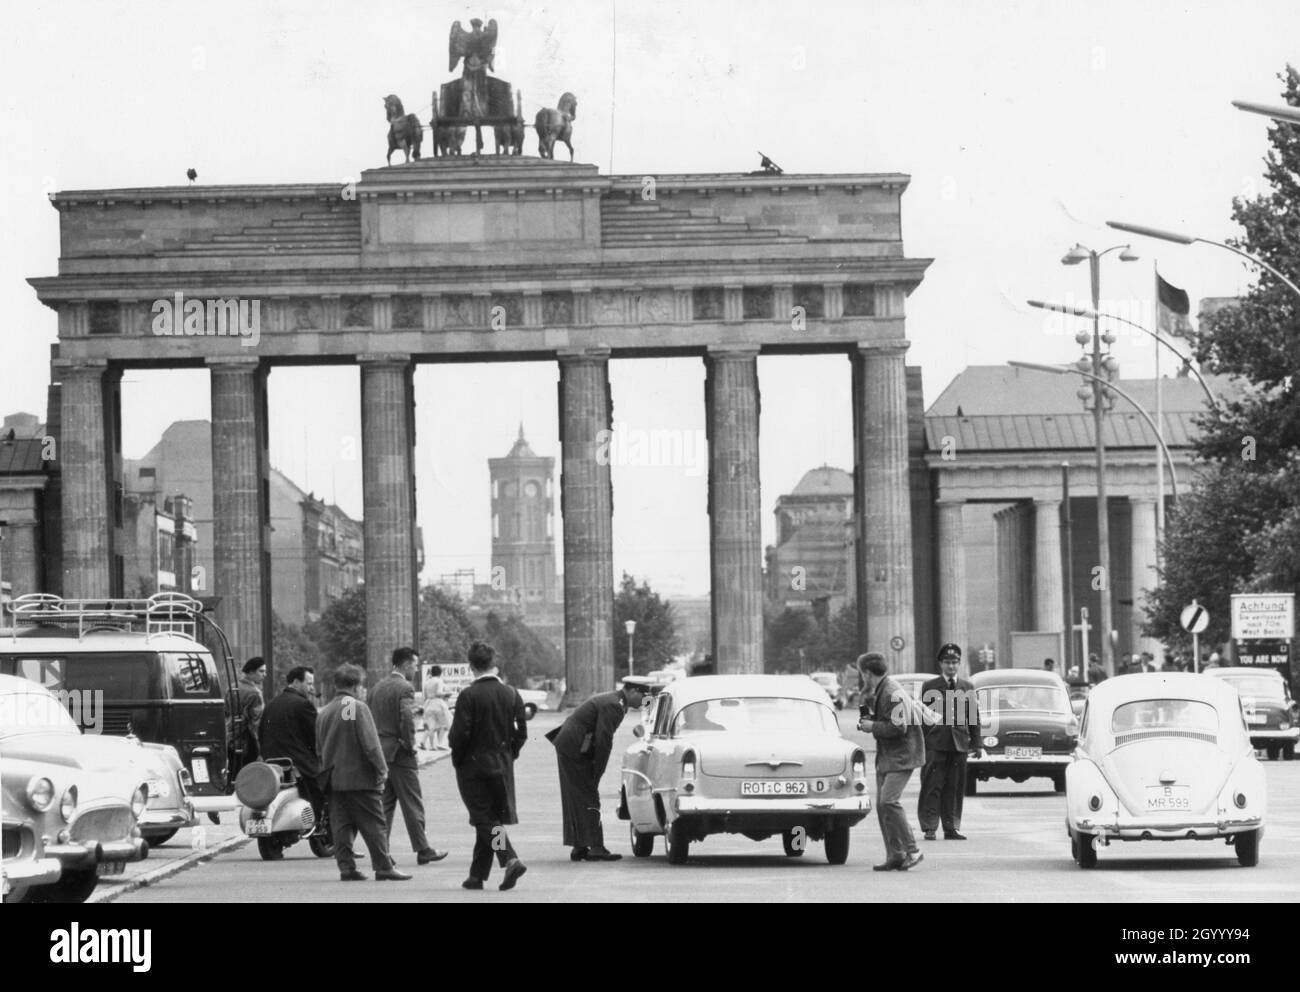 In front of the Brandenberg Gate which marks the border between East and West Berlin, West Berlin police warn motorists about the danger of entering East Berlin. The East Germans have barred West Germans from entering East Berlin, but West Berliners were still traveling freely. West Berlin, August 21, 1960. Stock Photo